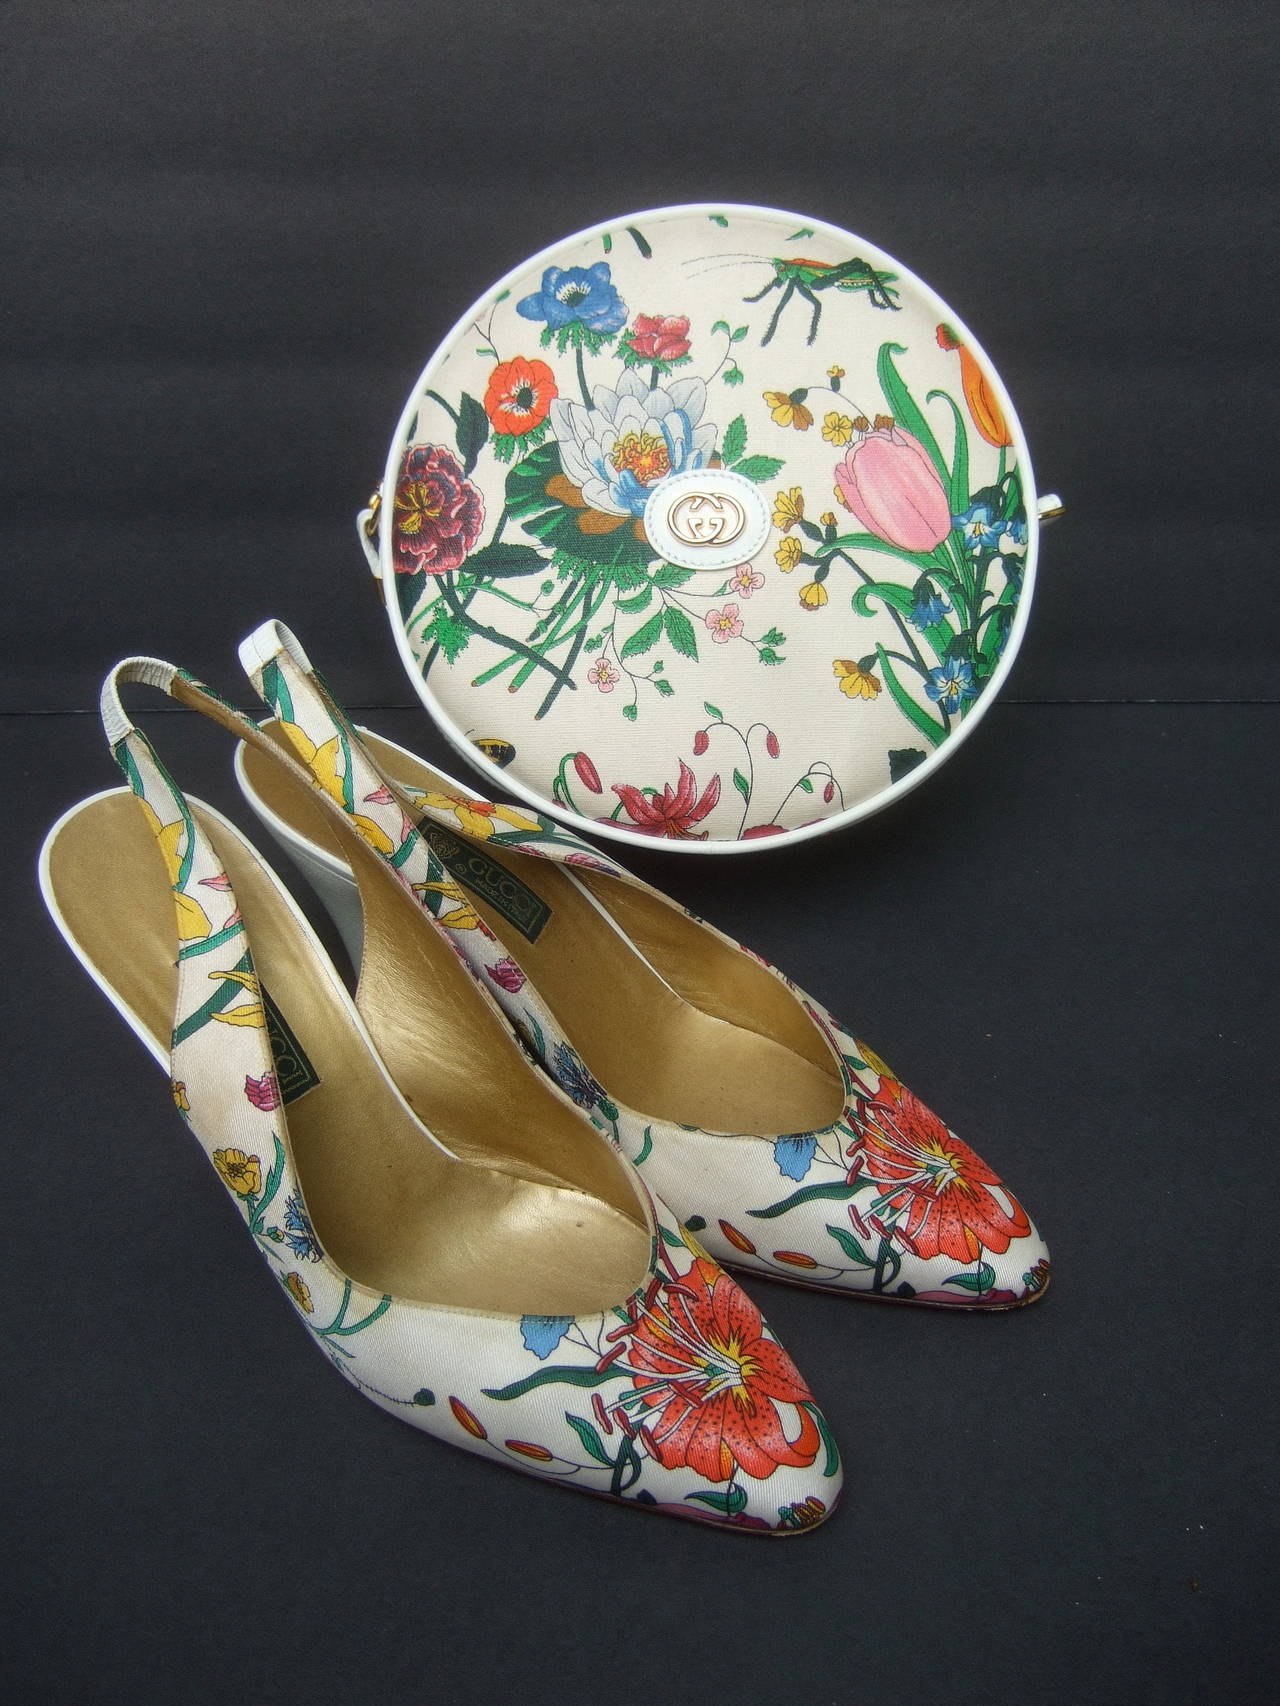 Gucci Chic 'flora' print handbag & matching silk sling back pumps c 1970s
The stylish Gucci round canteen shoulder bag is designed
with canvass flower print fabric; illustrated with vibrant flower
blooms with a grasshopper on both the front &